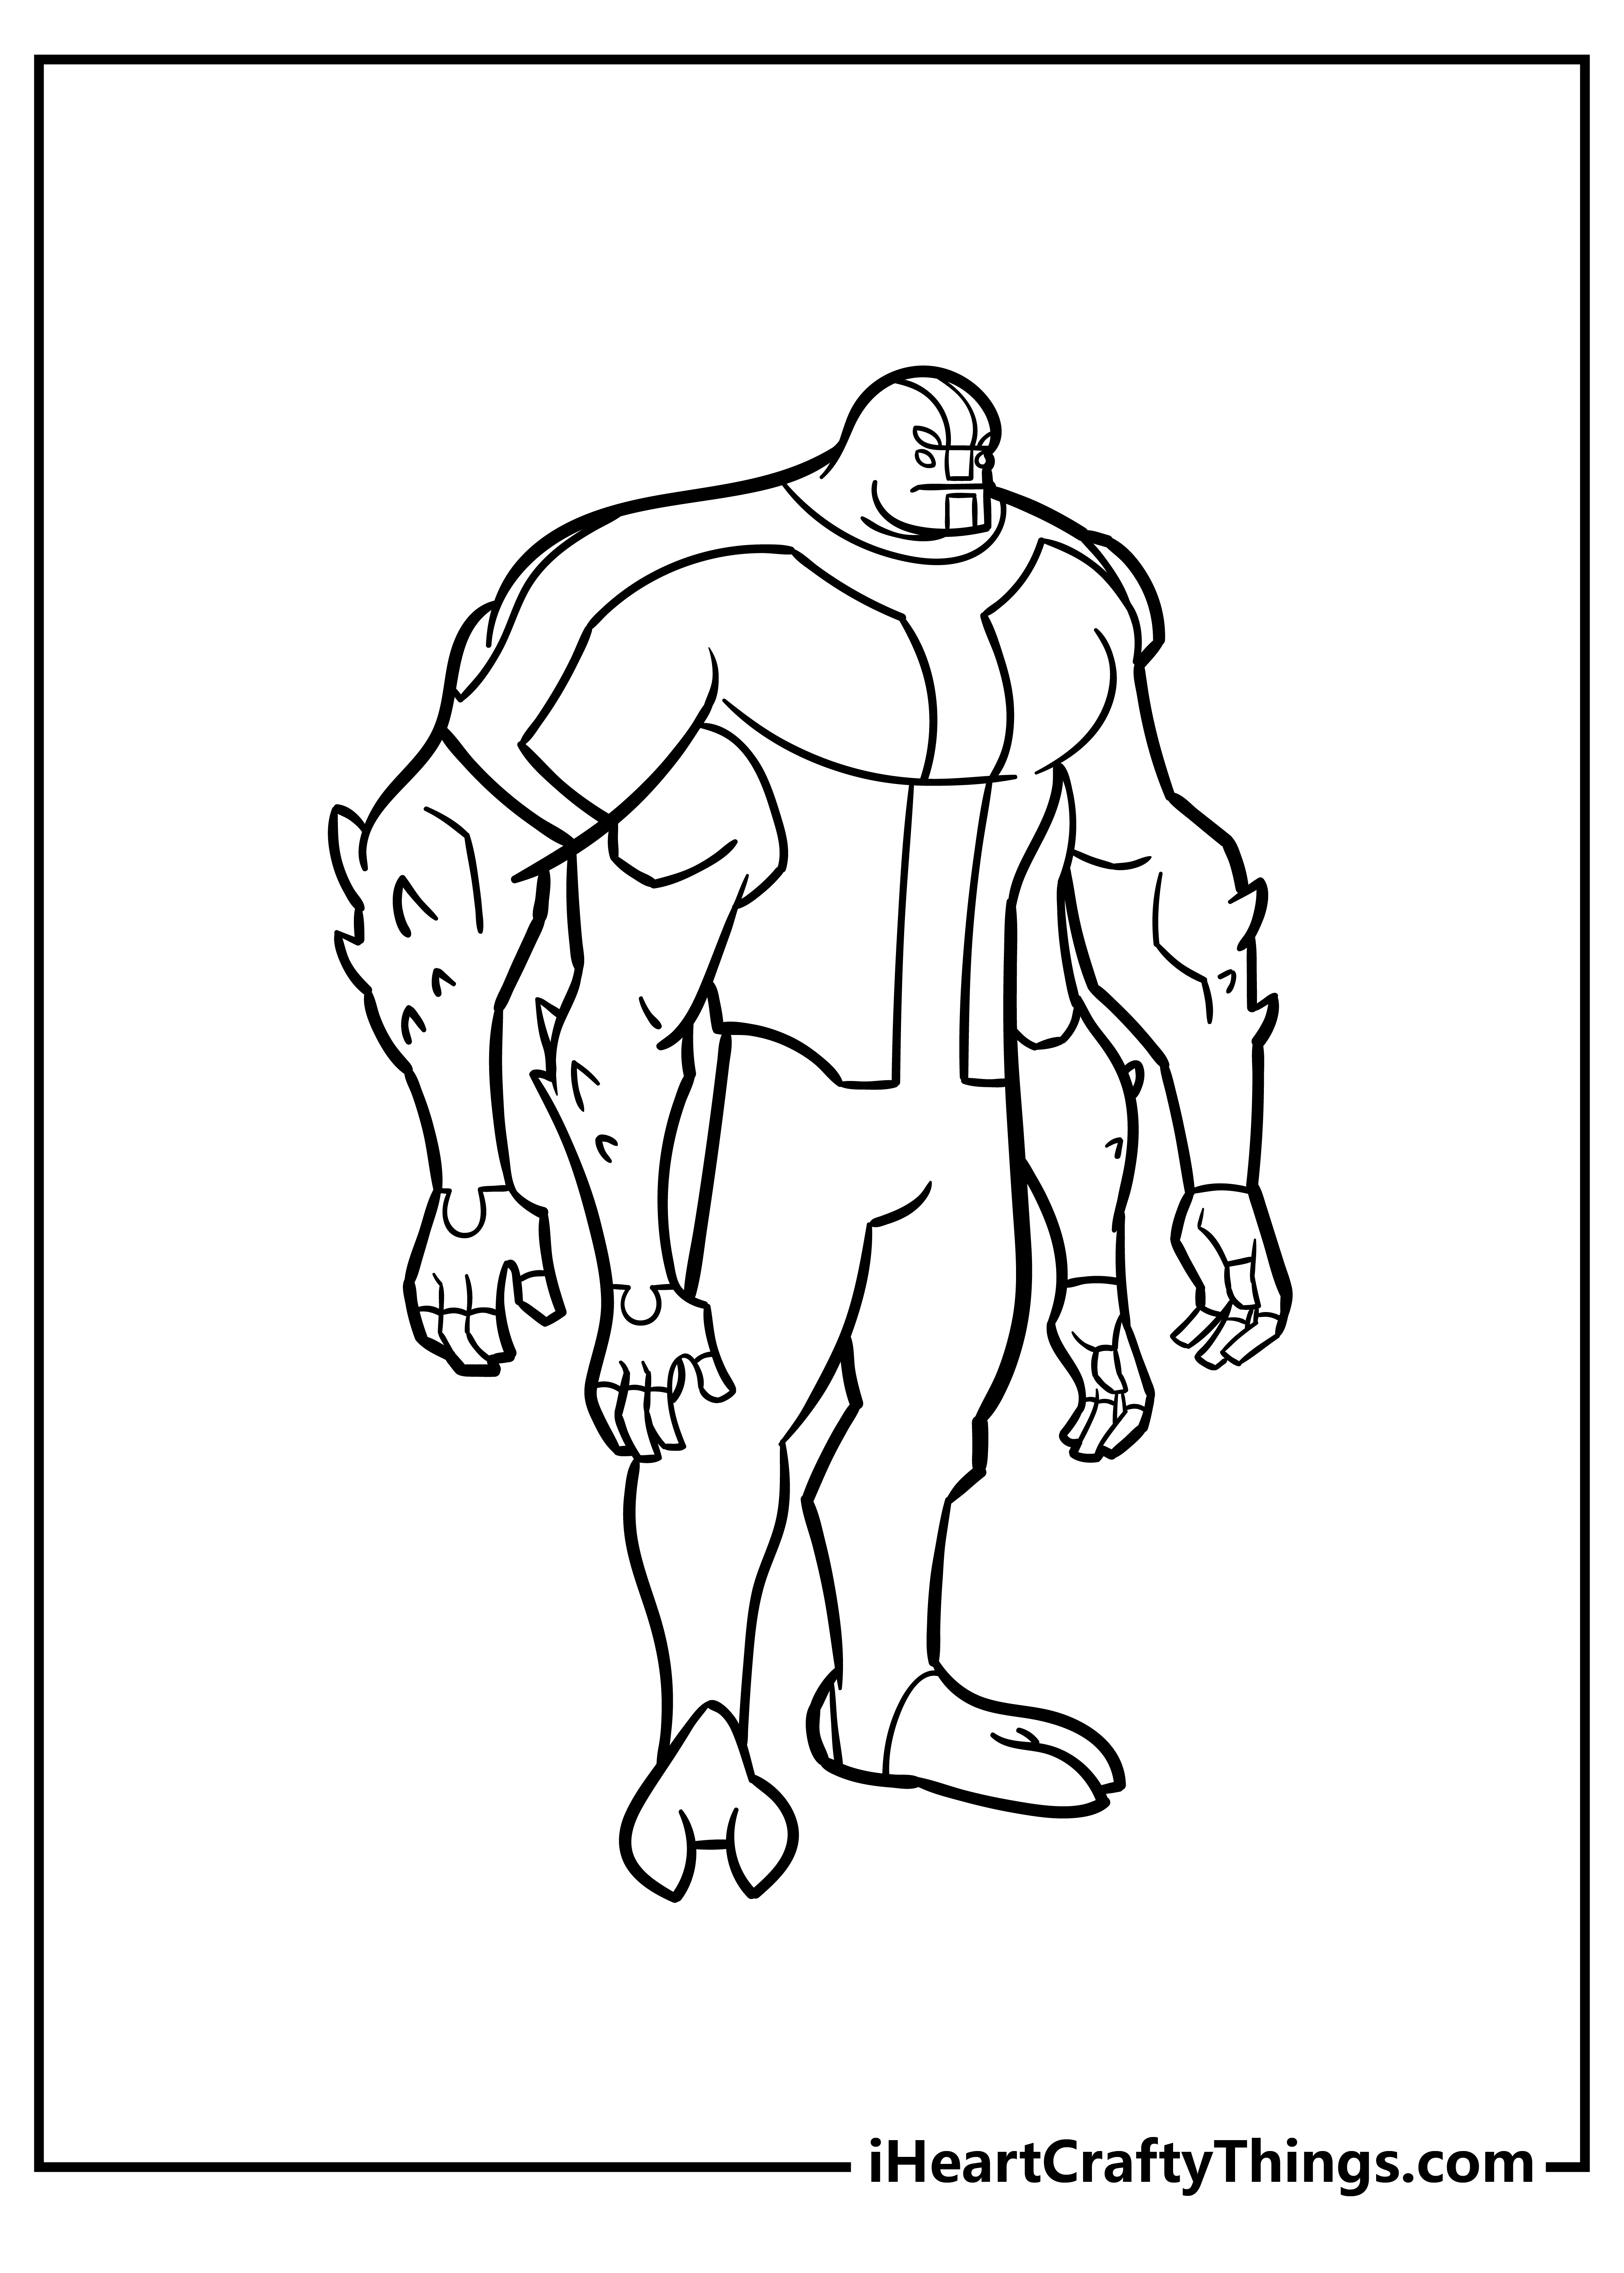 Ben 10 Upgrade coloring page - Download, Print or Color Online for Free